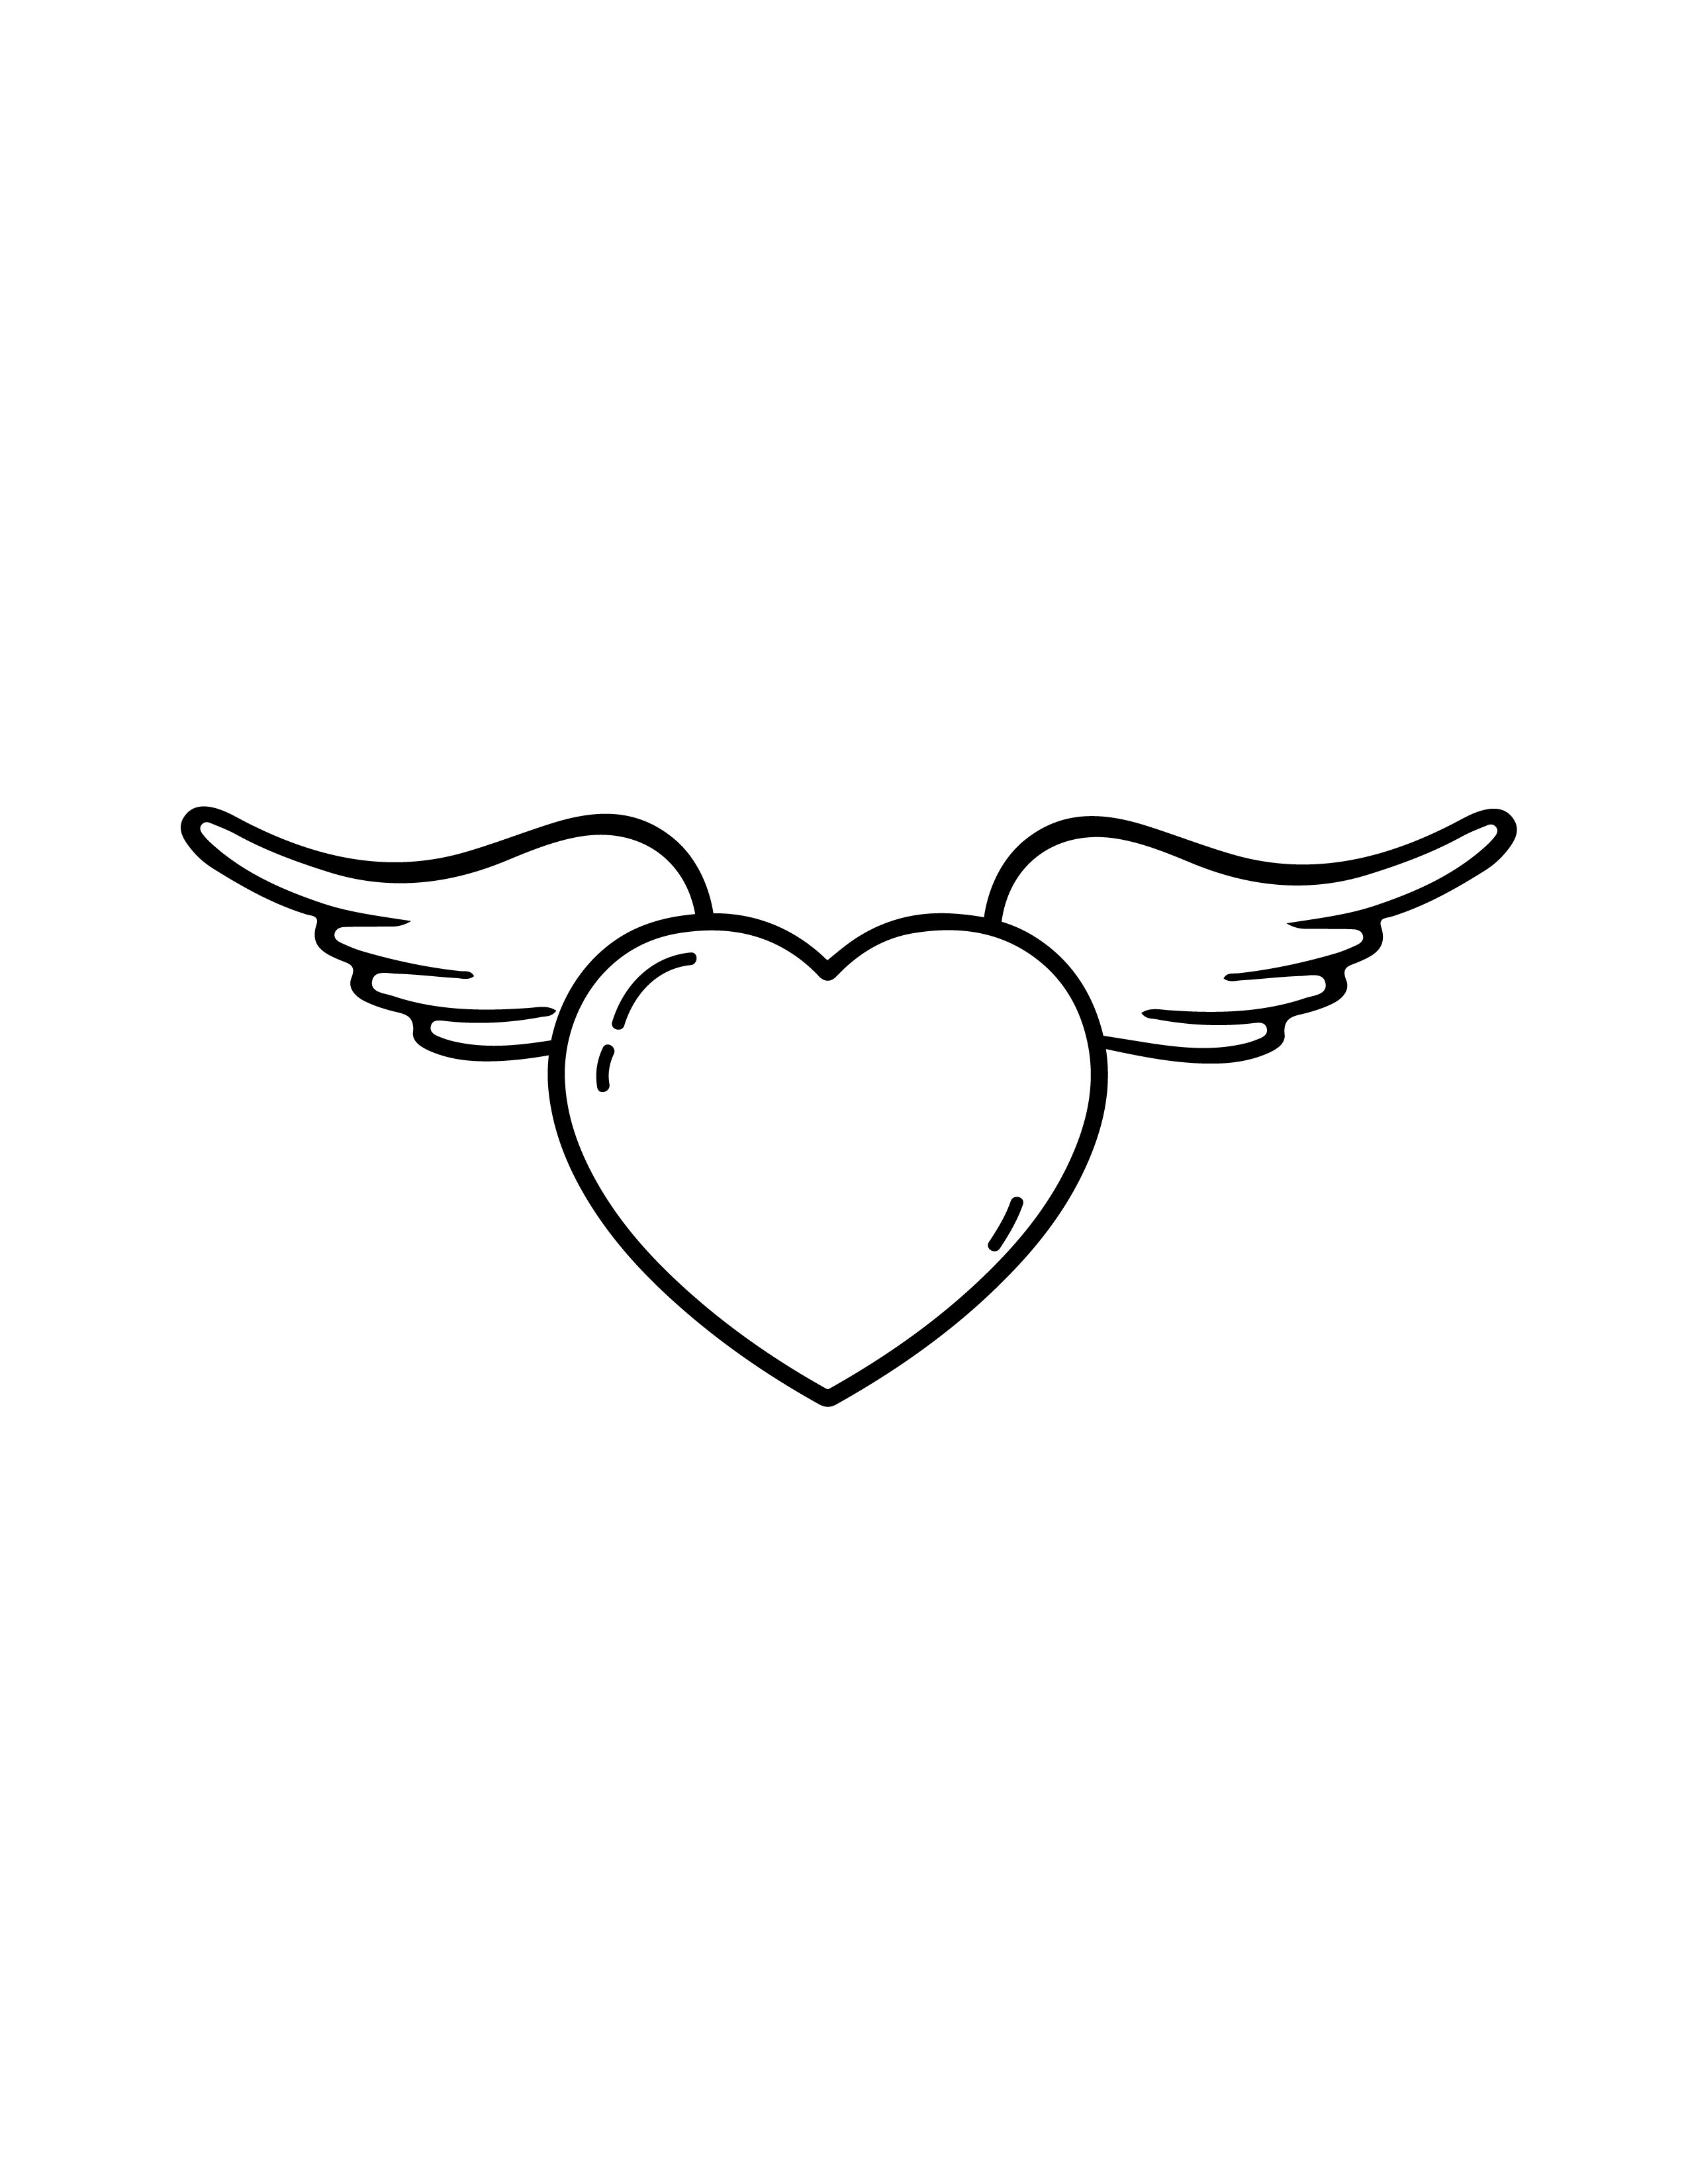 Hearts With Wings To Draw